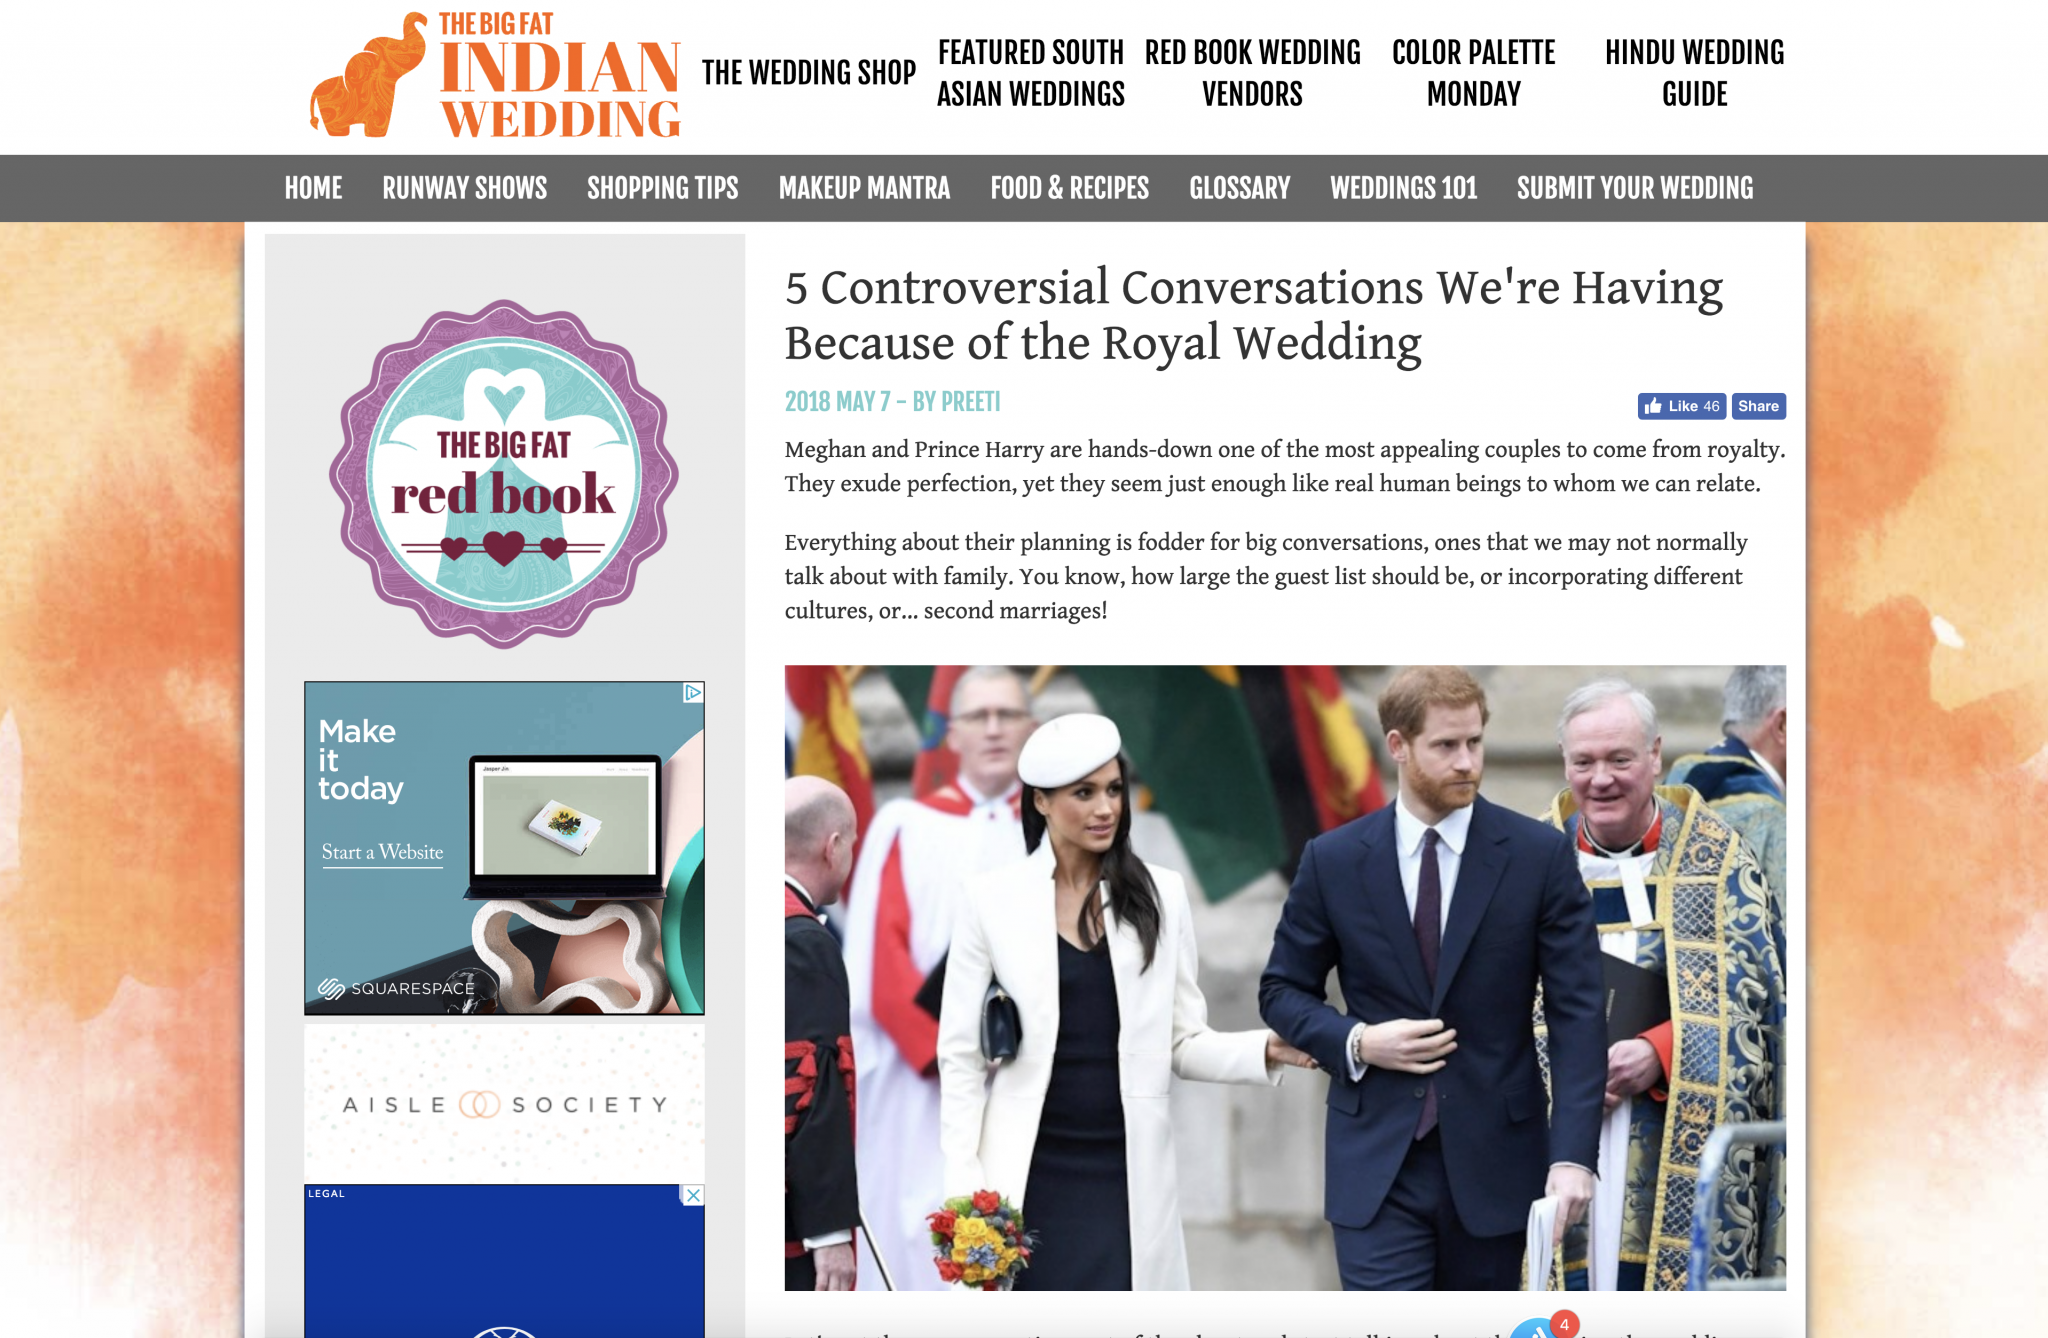 In the Press: The Big Fat Indian Wedding, SHEfinds, and AllSeated